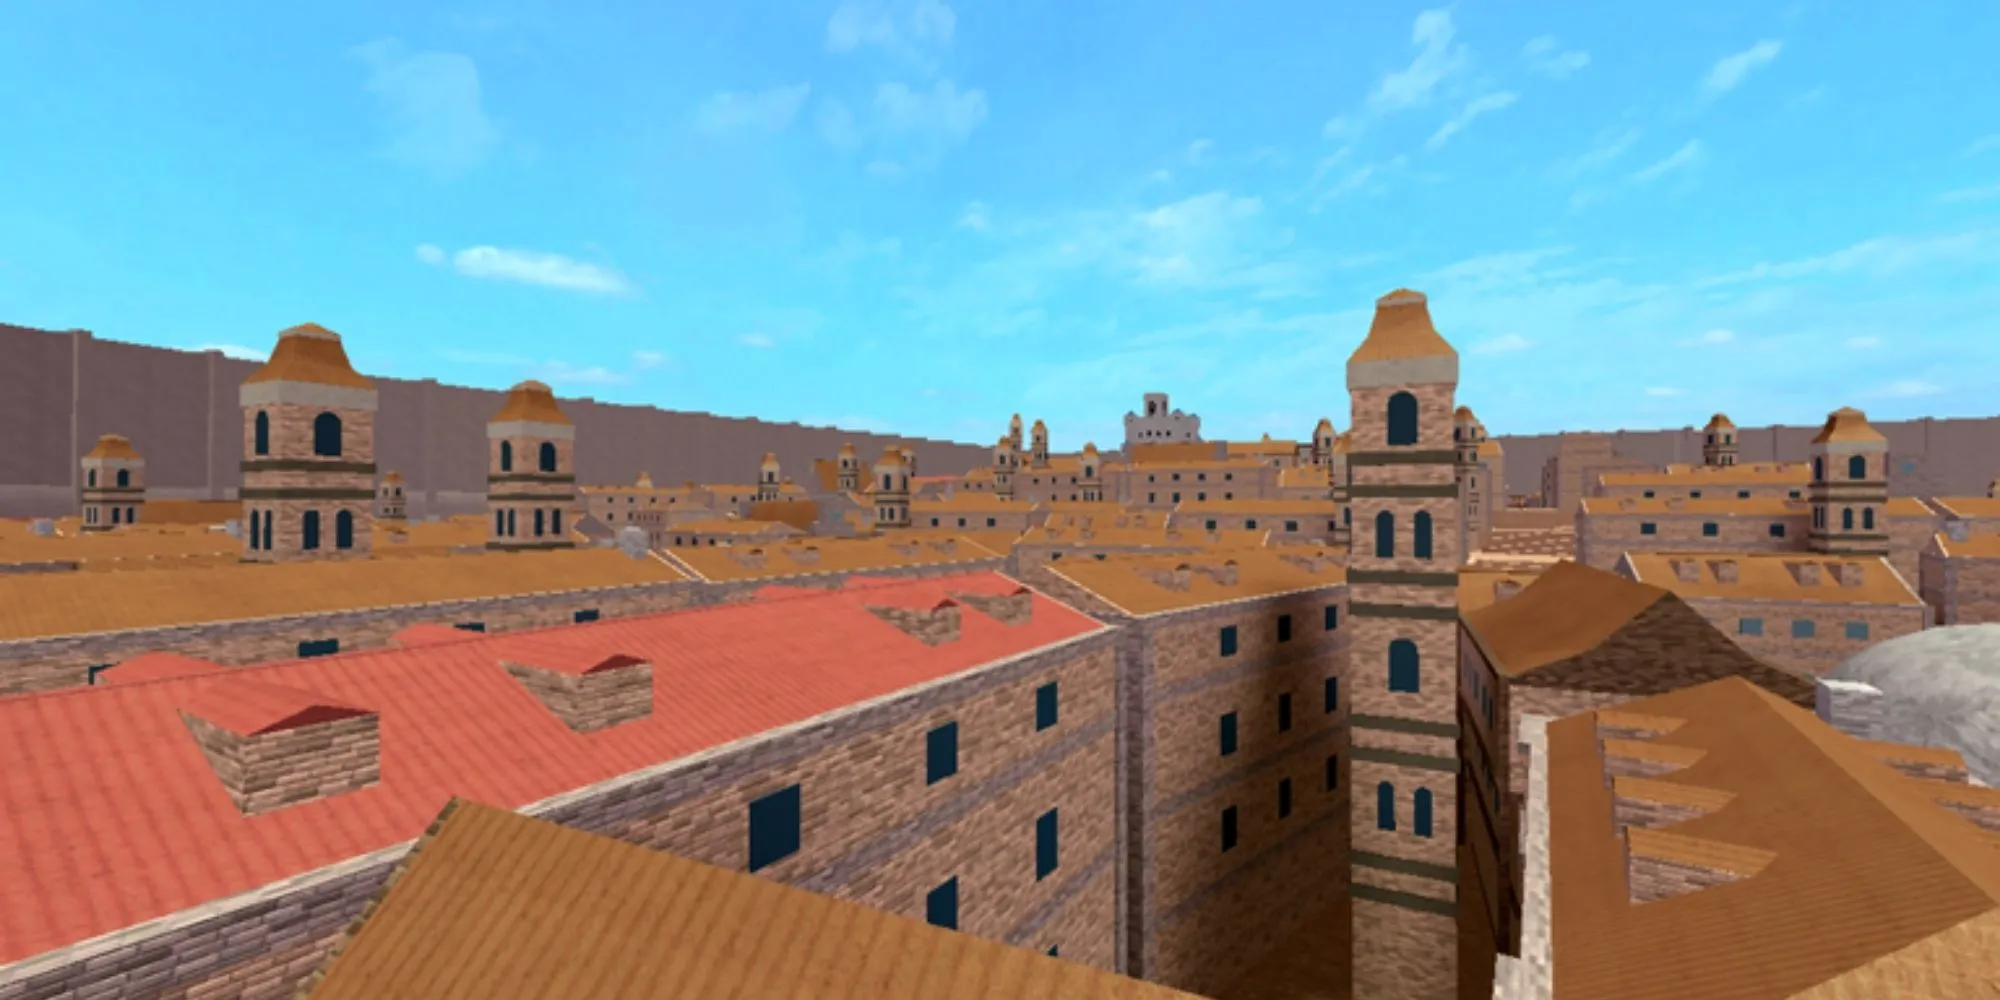 Still image of a city’s terraced houses from Roblox game Downfall Sandbox.